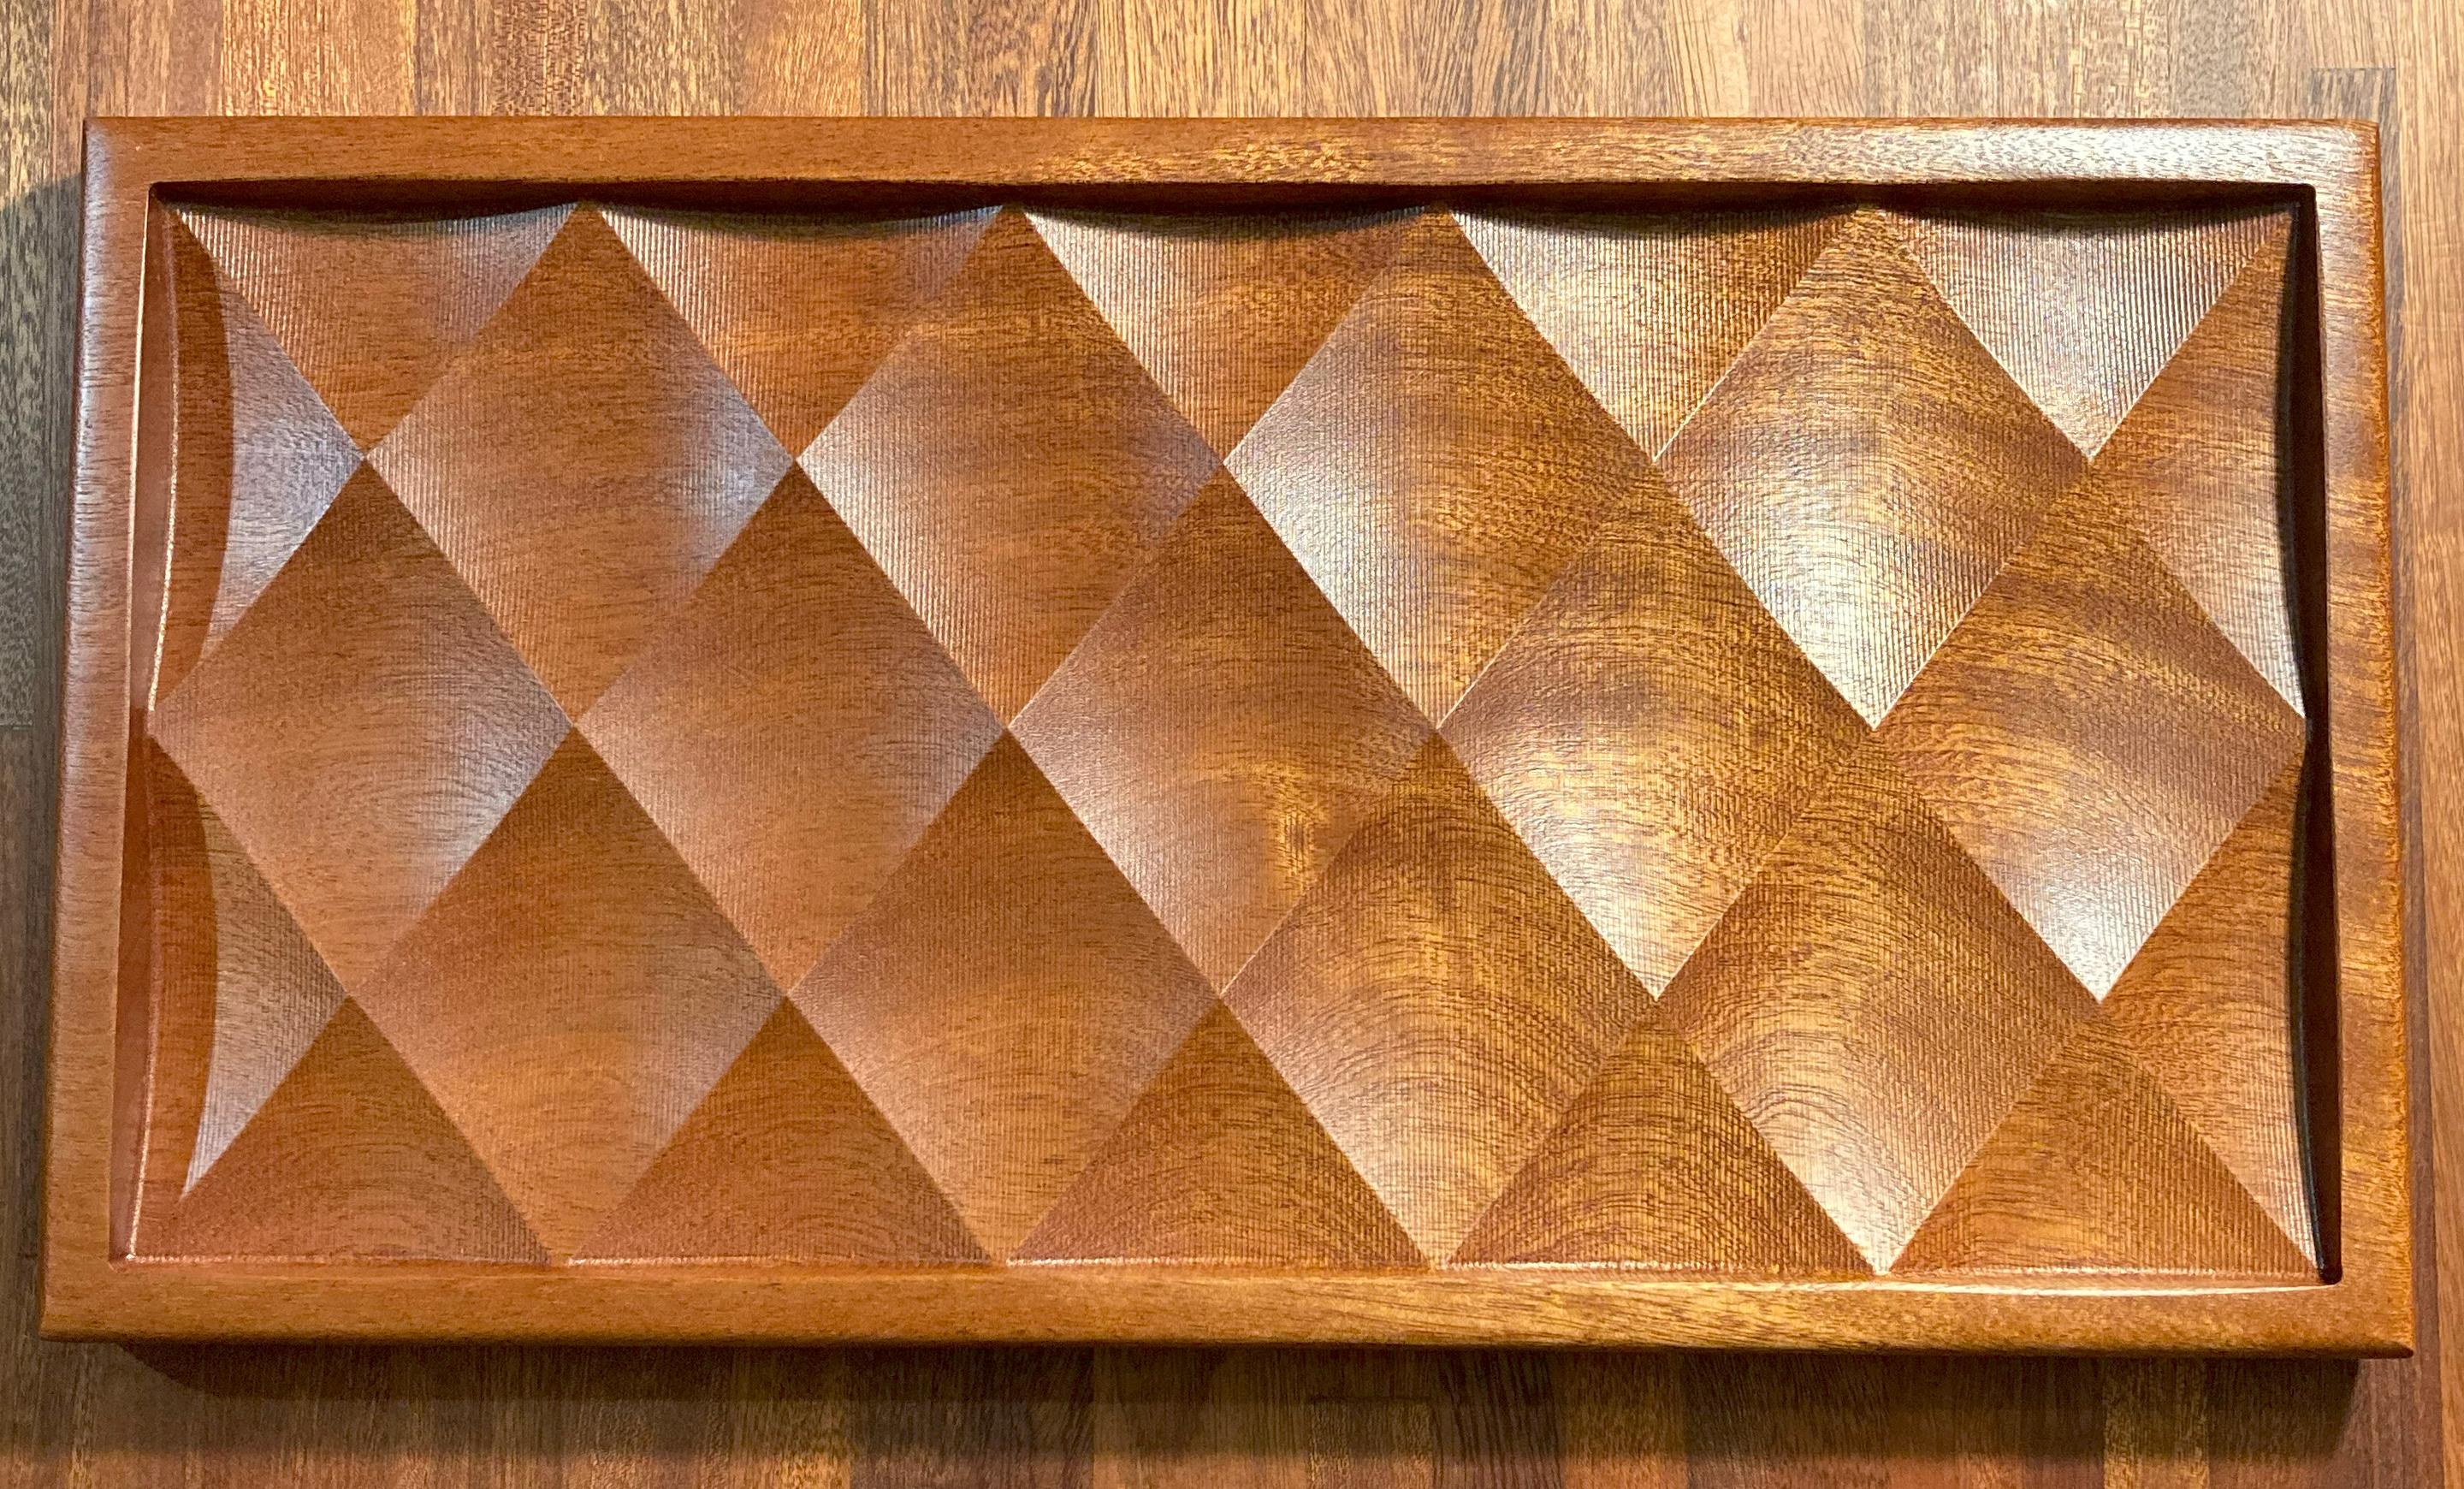 This stylish artisan Sapele wood valet tray, vanity tray or catchall tray for home, office, dresser or kitchen is  a collectable among home decorators.  For home, office, dresser or kitchen made just for you from solid natural golden red Sapele